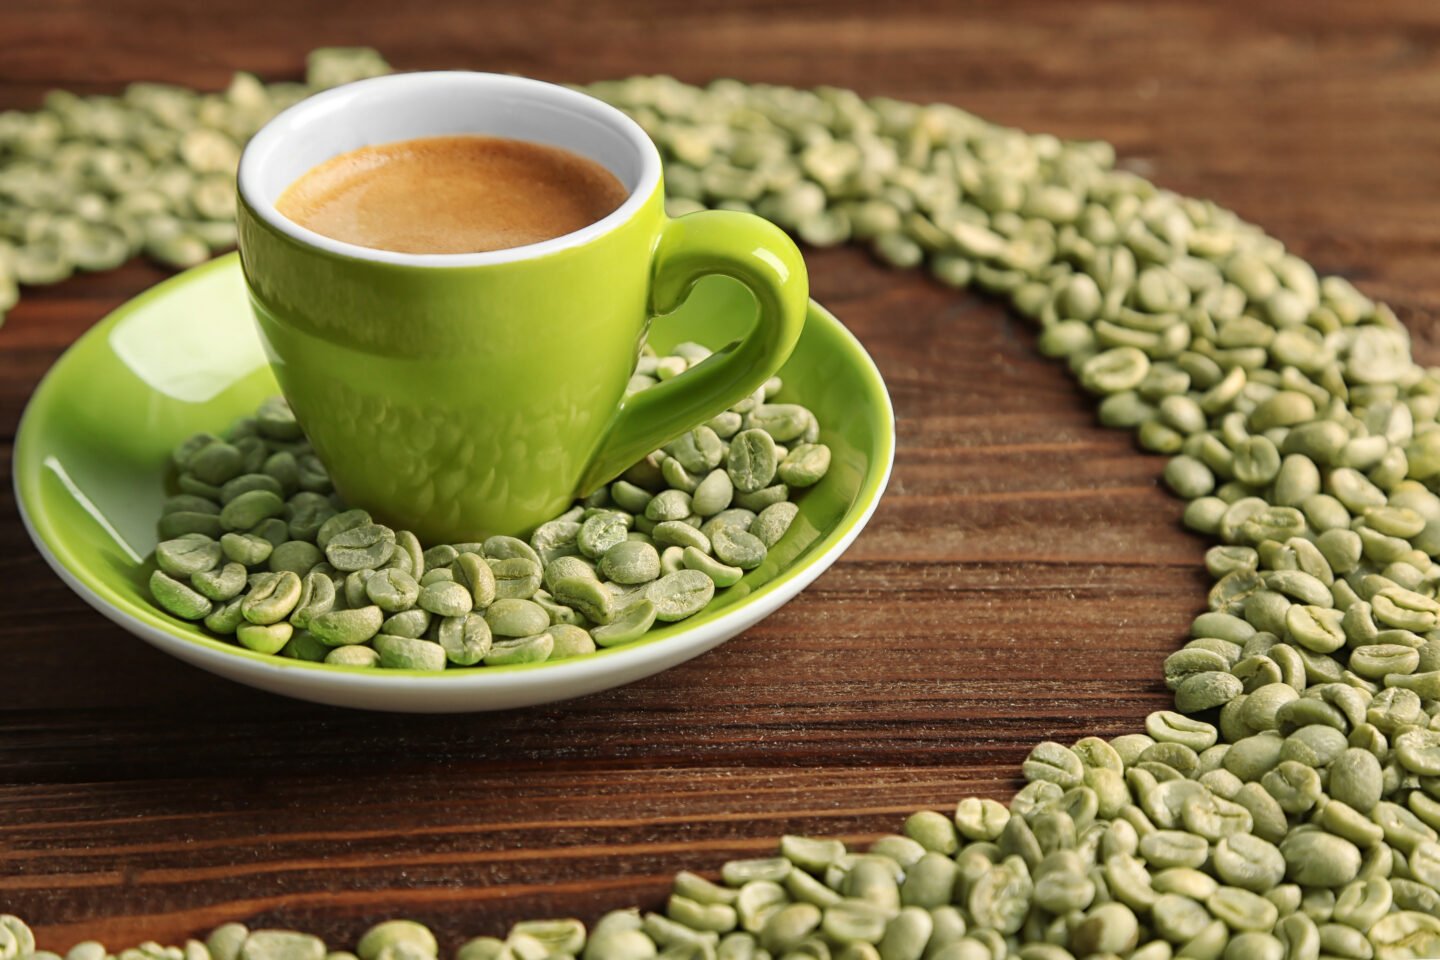 a-cup-of-coffee-with-green-coffee-beans-on-a-wooden-table